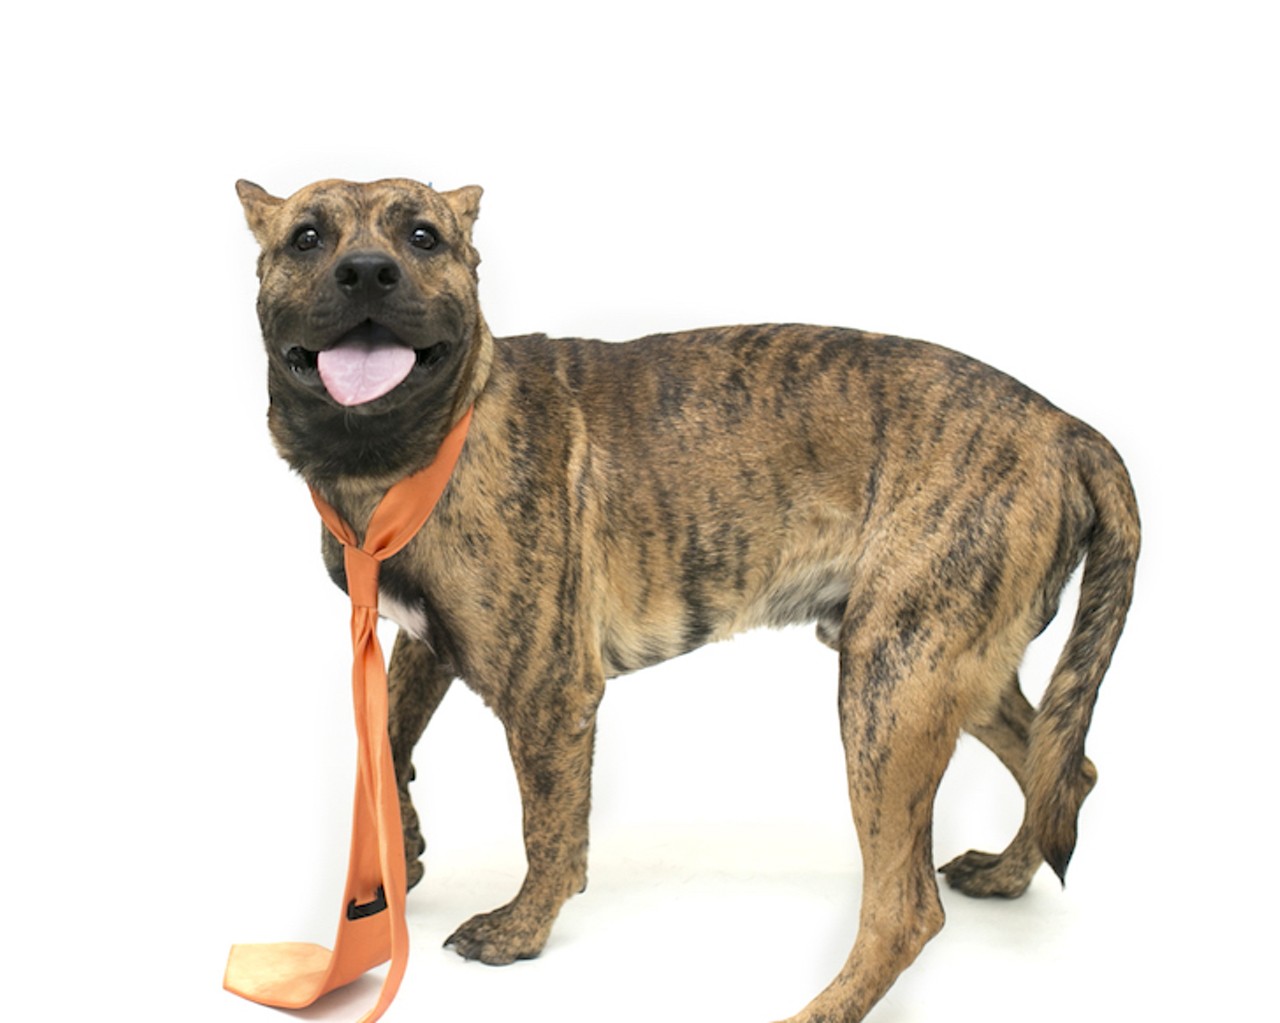 18 adoptable Orange County dogs ready for a serious commitment